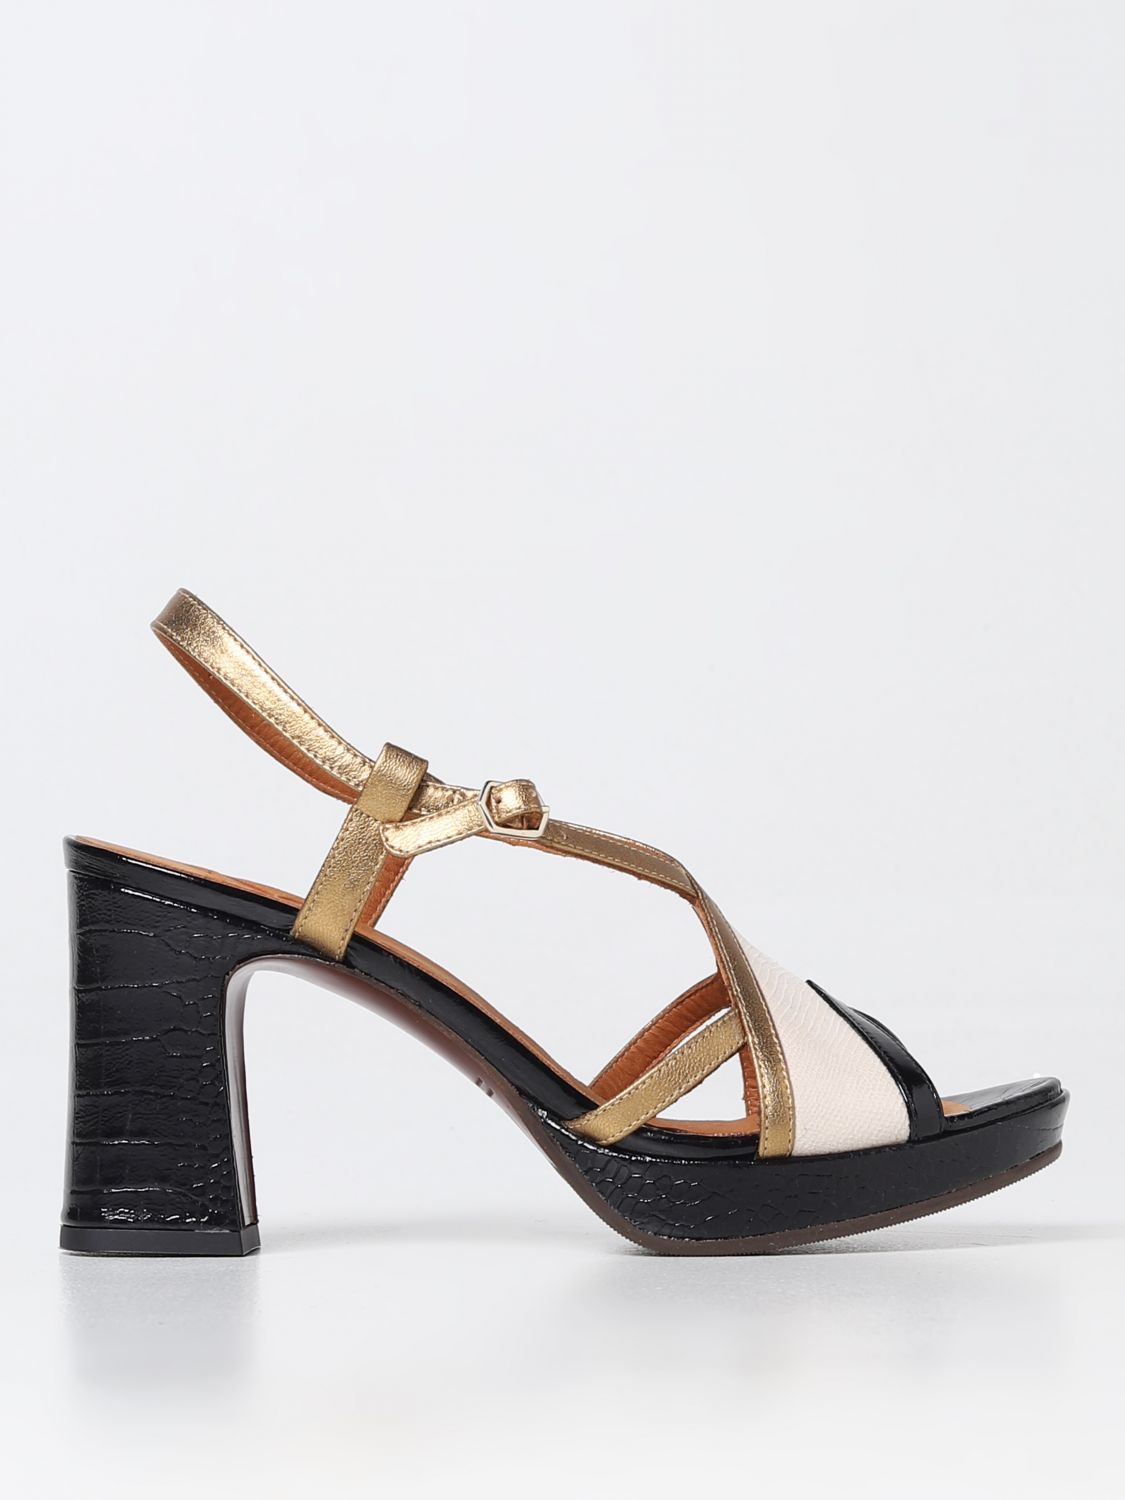 Chie Mihara Sandals In Black | ModeSens